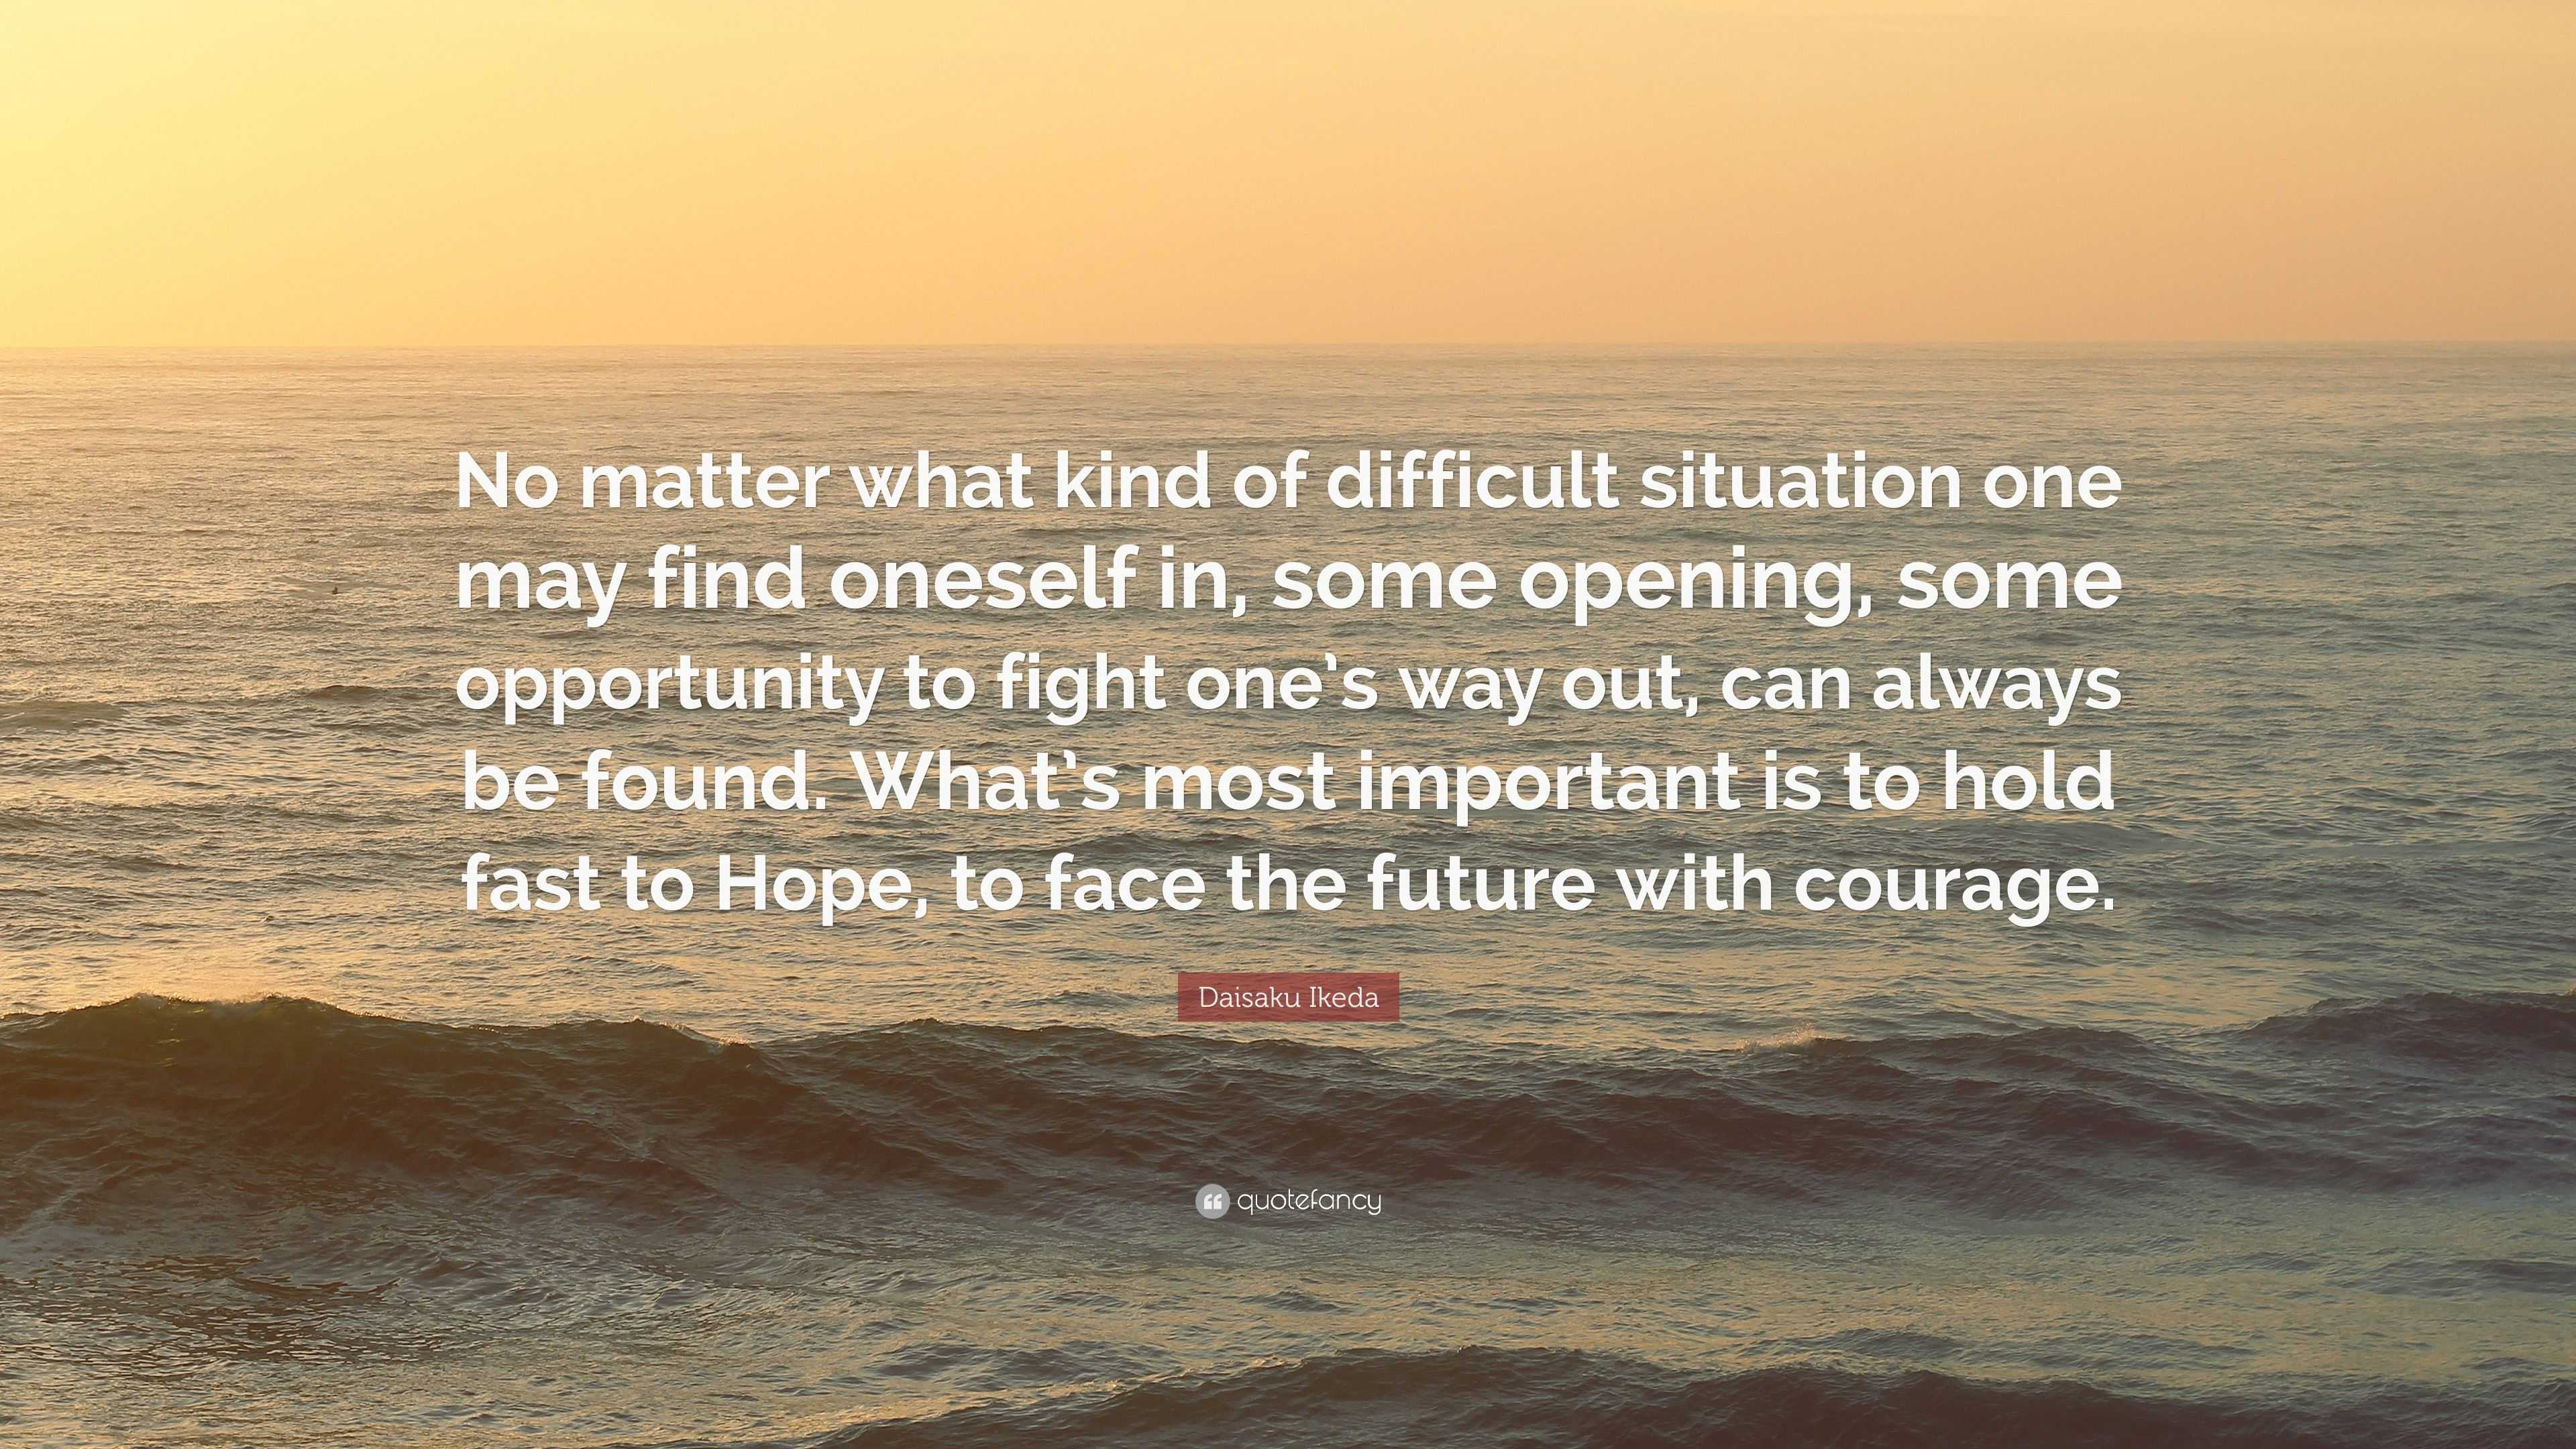 Daisaku Ikeda Quote: “No matter what kind of difficult situation one ...